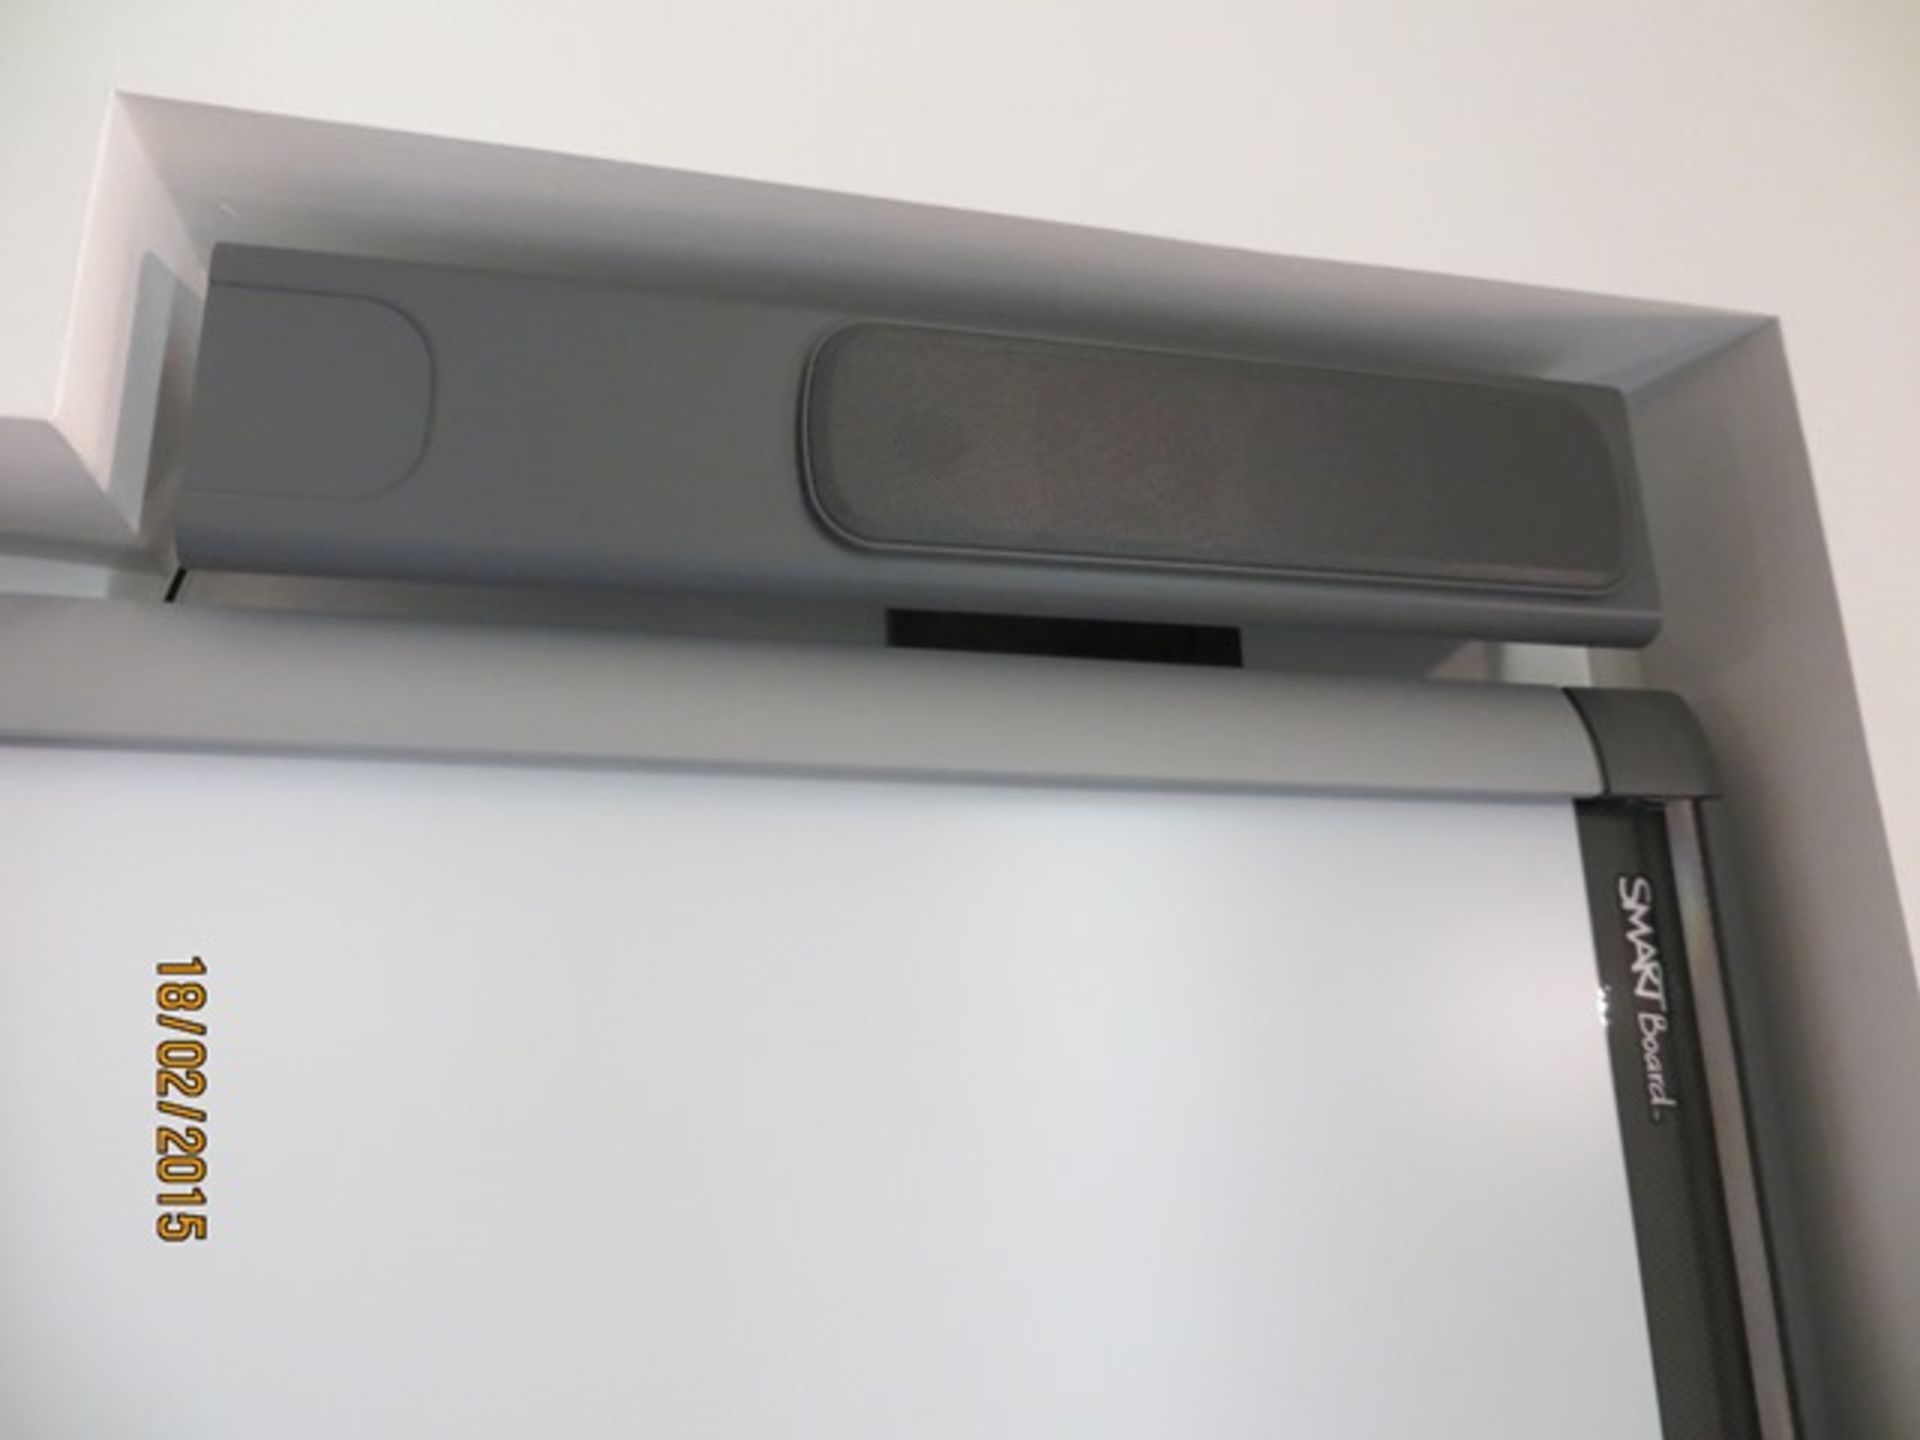 Smart board 2000mm x 1300mm DViT projection system complete with loud speakers and smart UX60 - Image 2 of 3